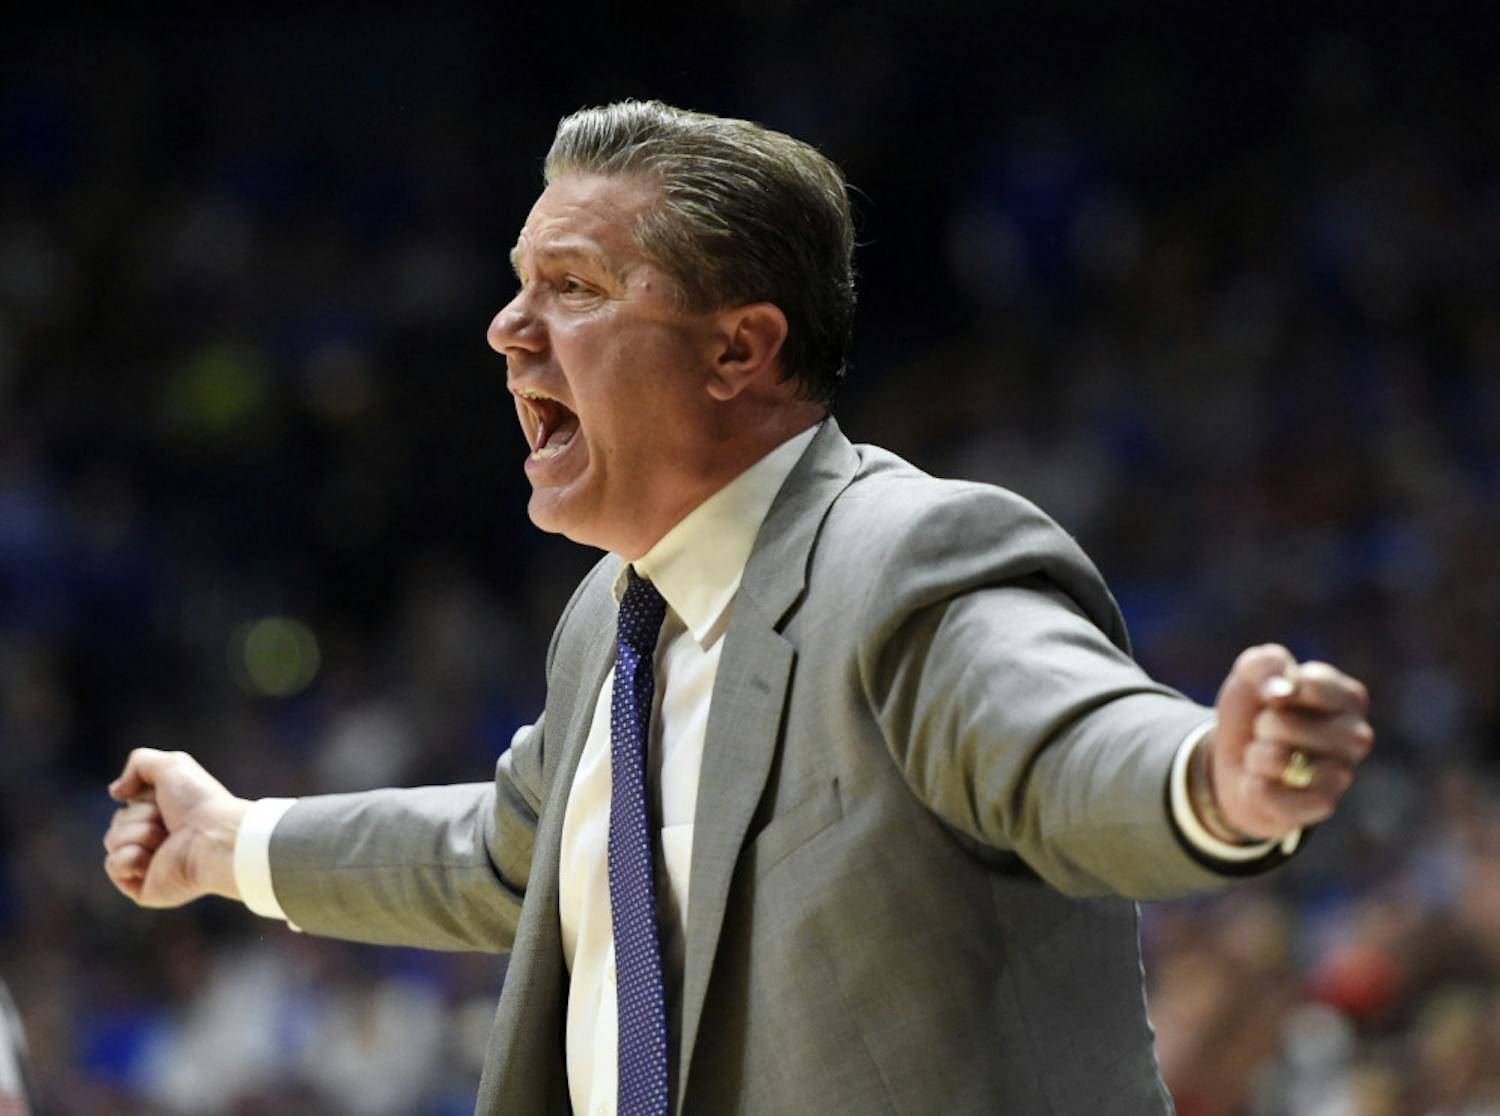 Kentucky head coach John Calipari yells to his players in the second half of an NCAA college basketball game against Arkansas for the championship of the Southeastern Conference tournament Sunday, March 12, 2017, in Nashville, Tenn. Kentucky won 82-65. (AP Photo/Sanford Myers)